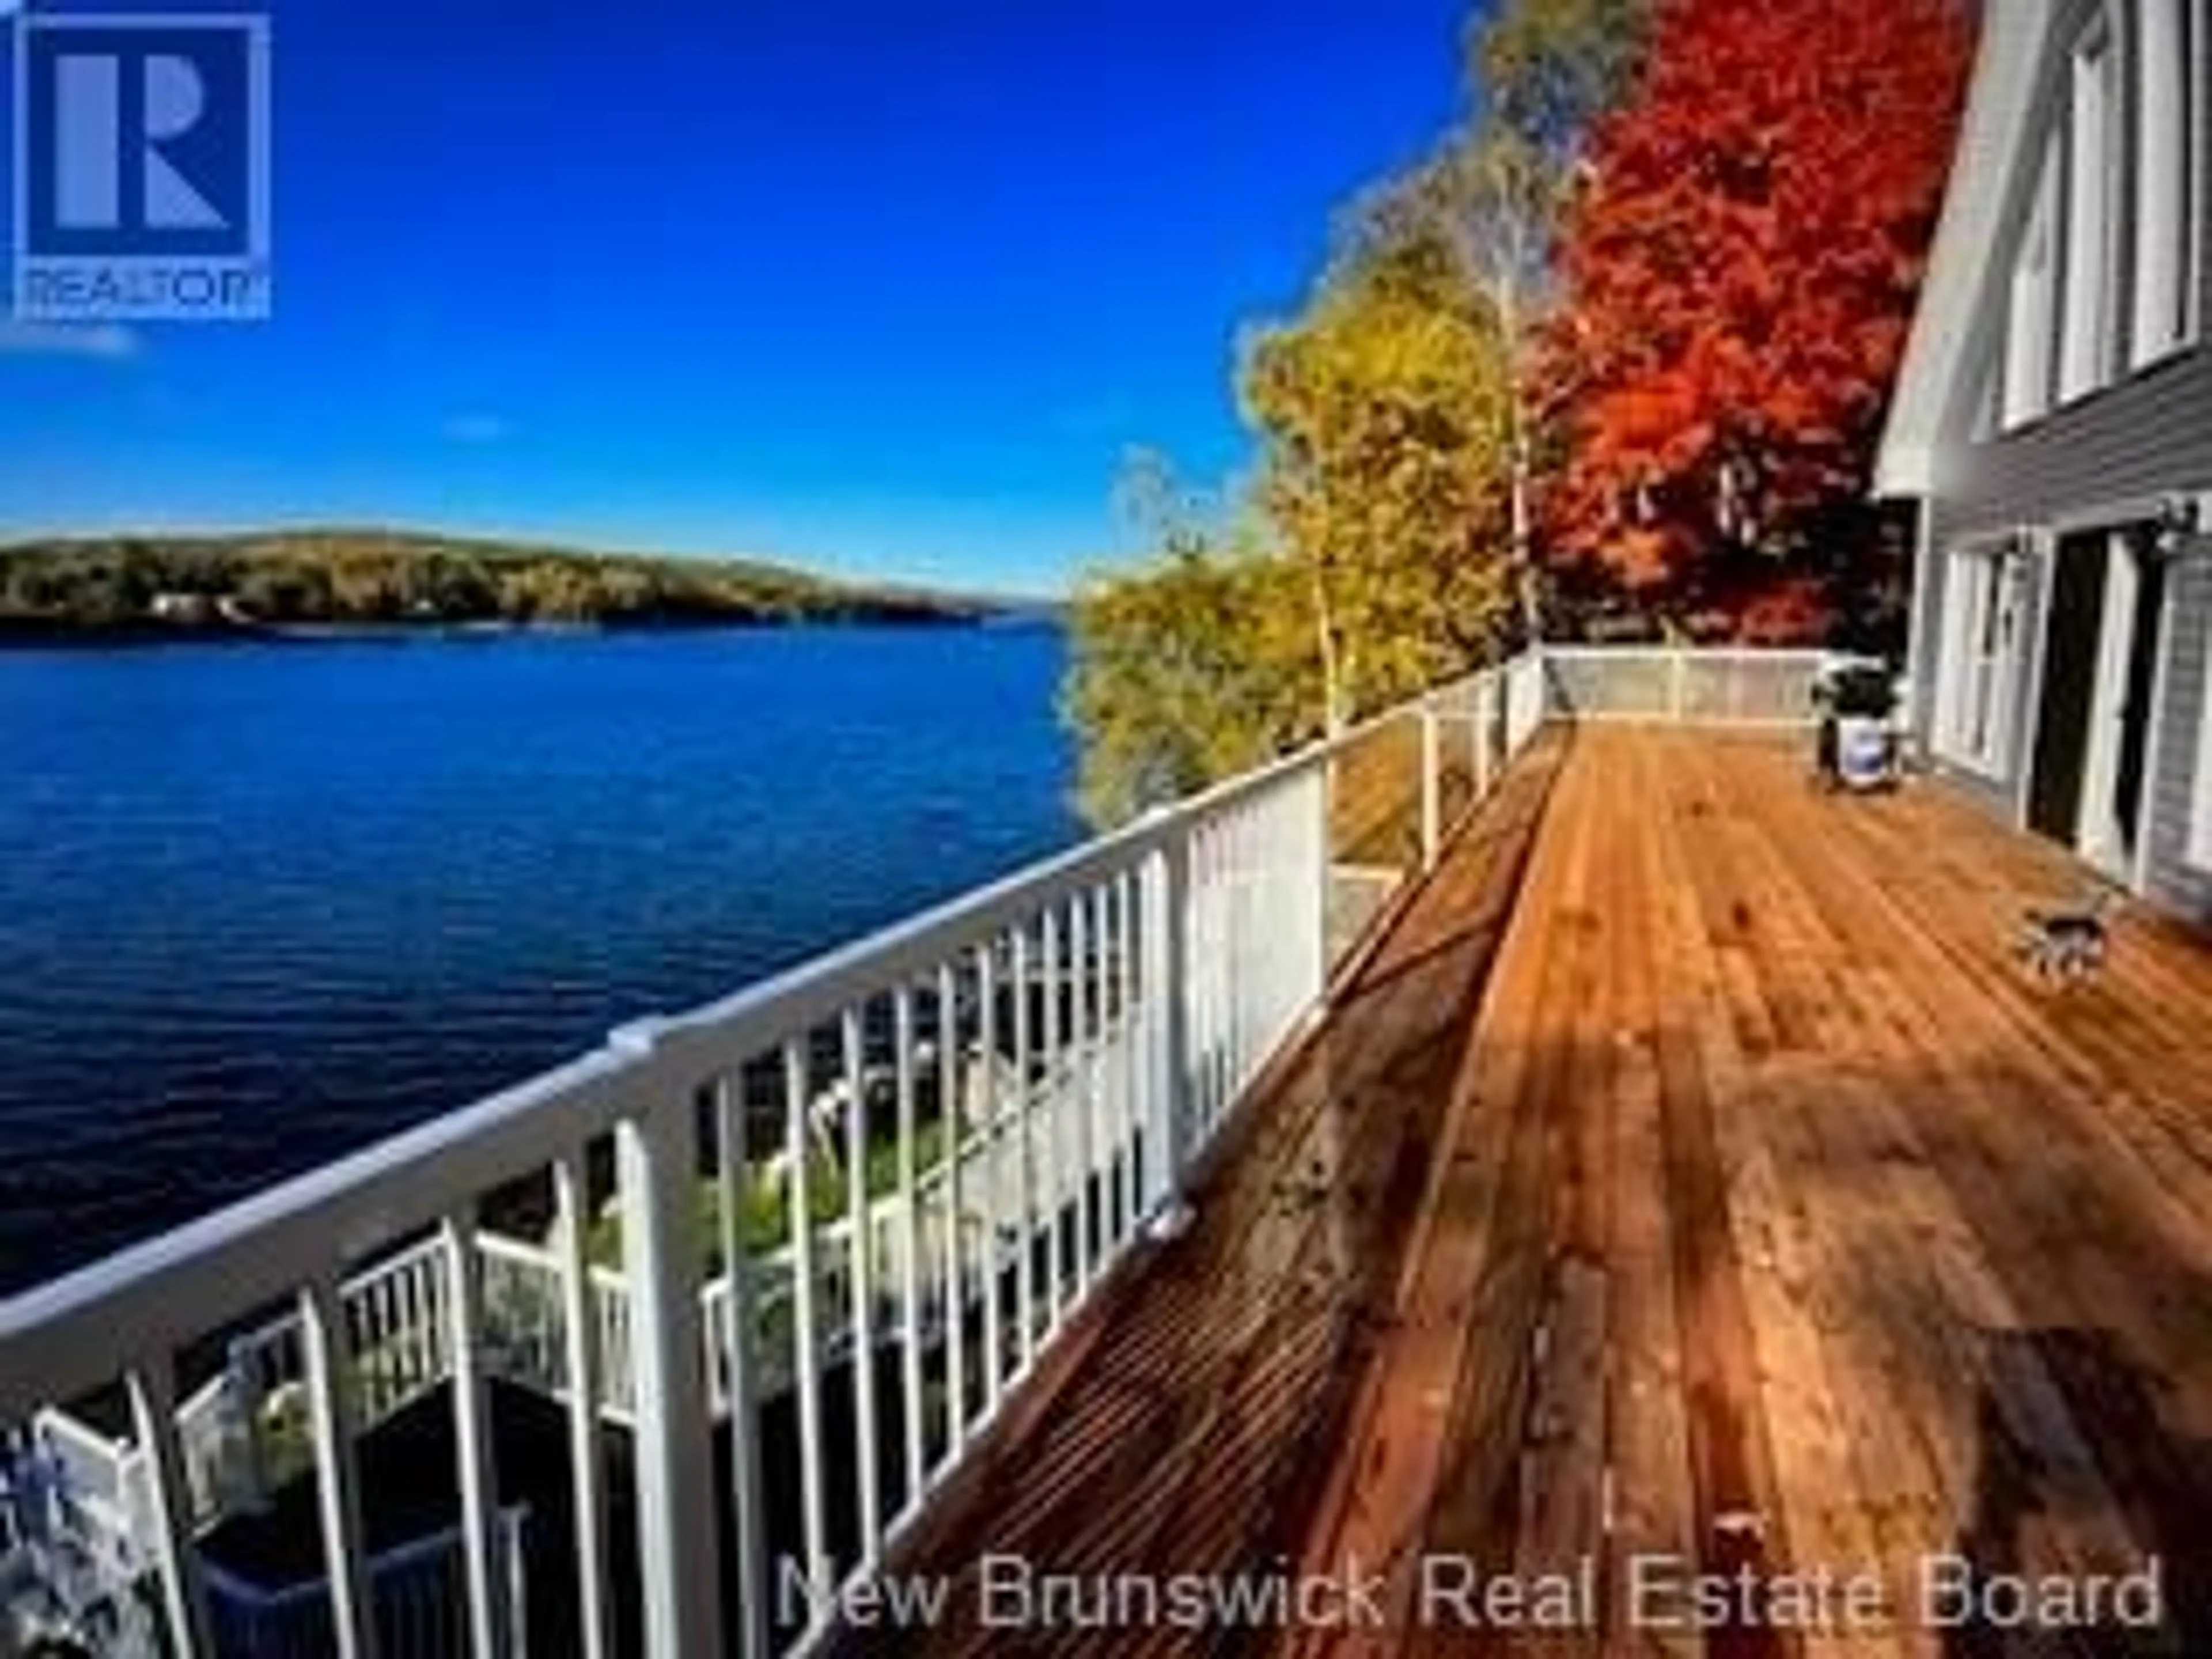 Lakeview for 61 O'Neill Road, Gladwyn New Brunswick E7H3H8